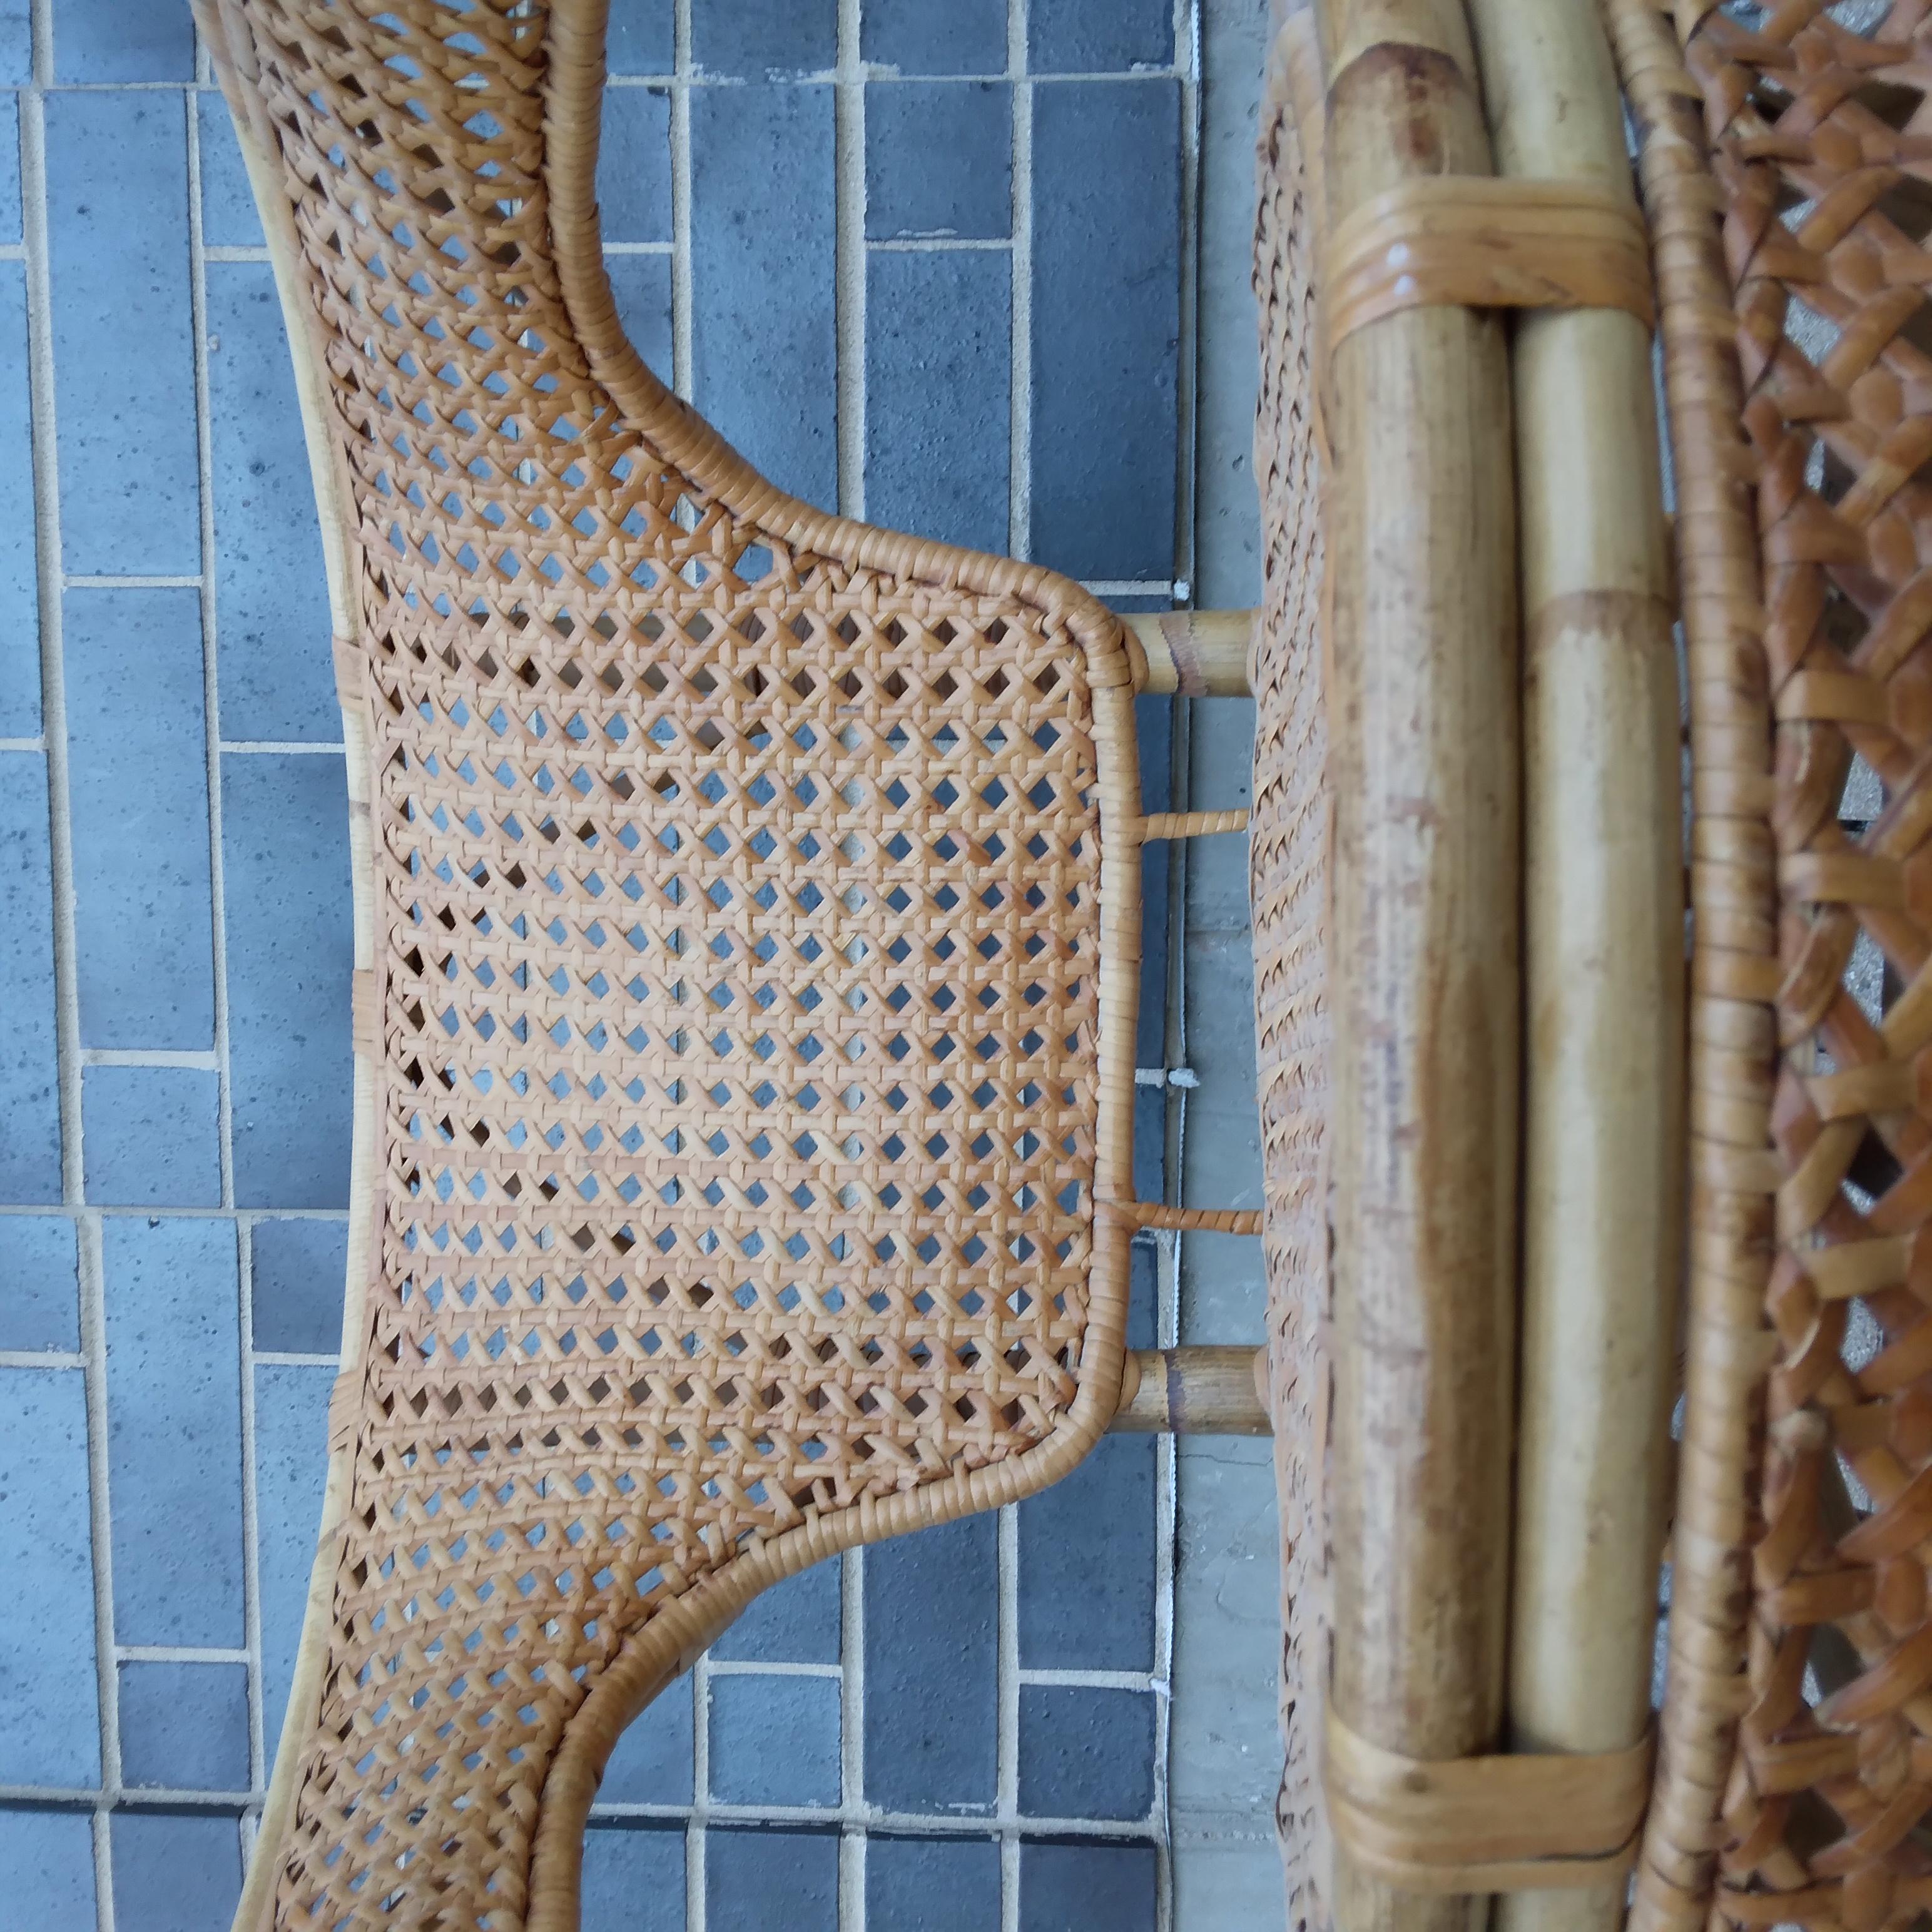 Woven patterns of sunbaked sand wind their way across this vintage wicker armchair. We love her petite curves and close-knit, diamond-shaped weave. Let us know if you want this boho beauty for yourself!
 